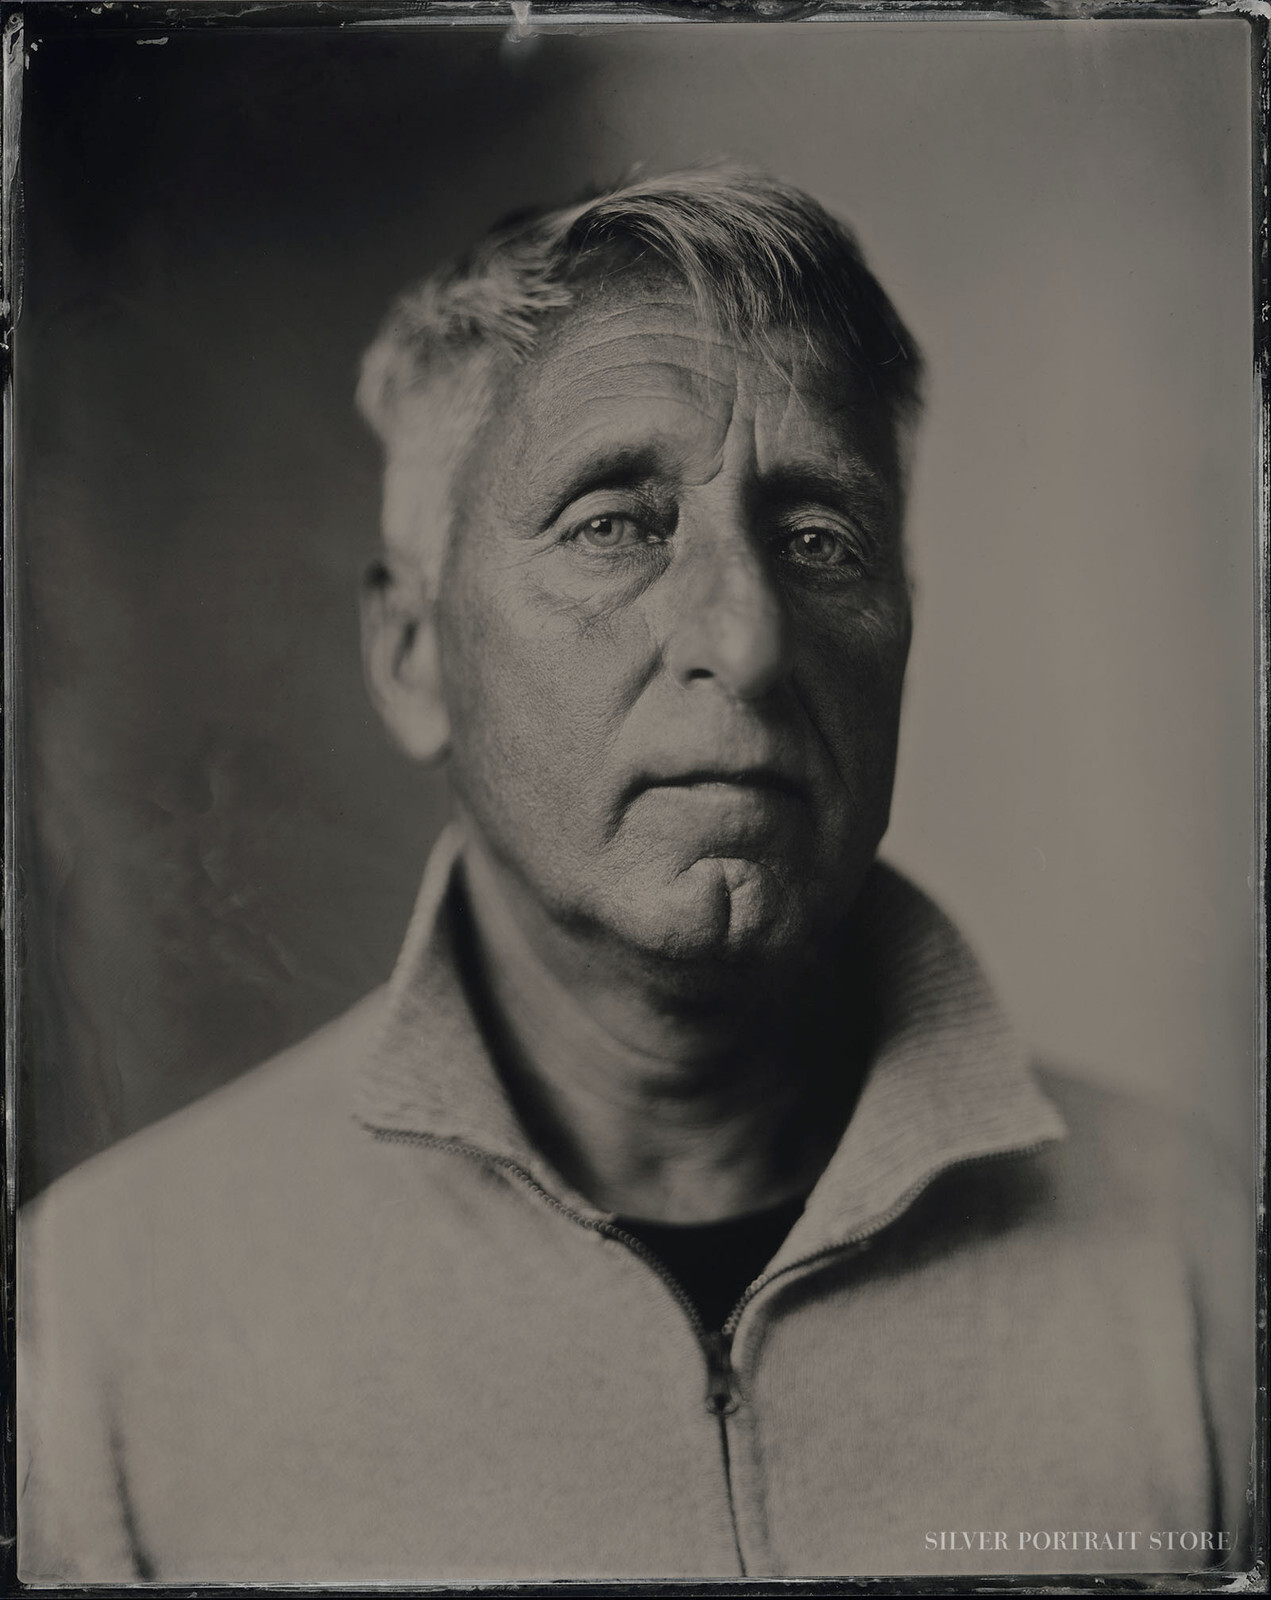 Stag-Silver Portrait Store-scan from Wet plate collodion-Tintype 20 x 25 cm.